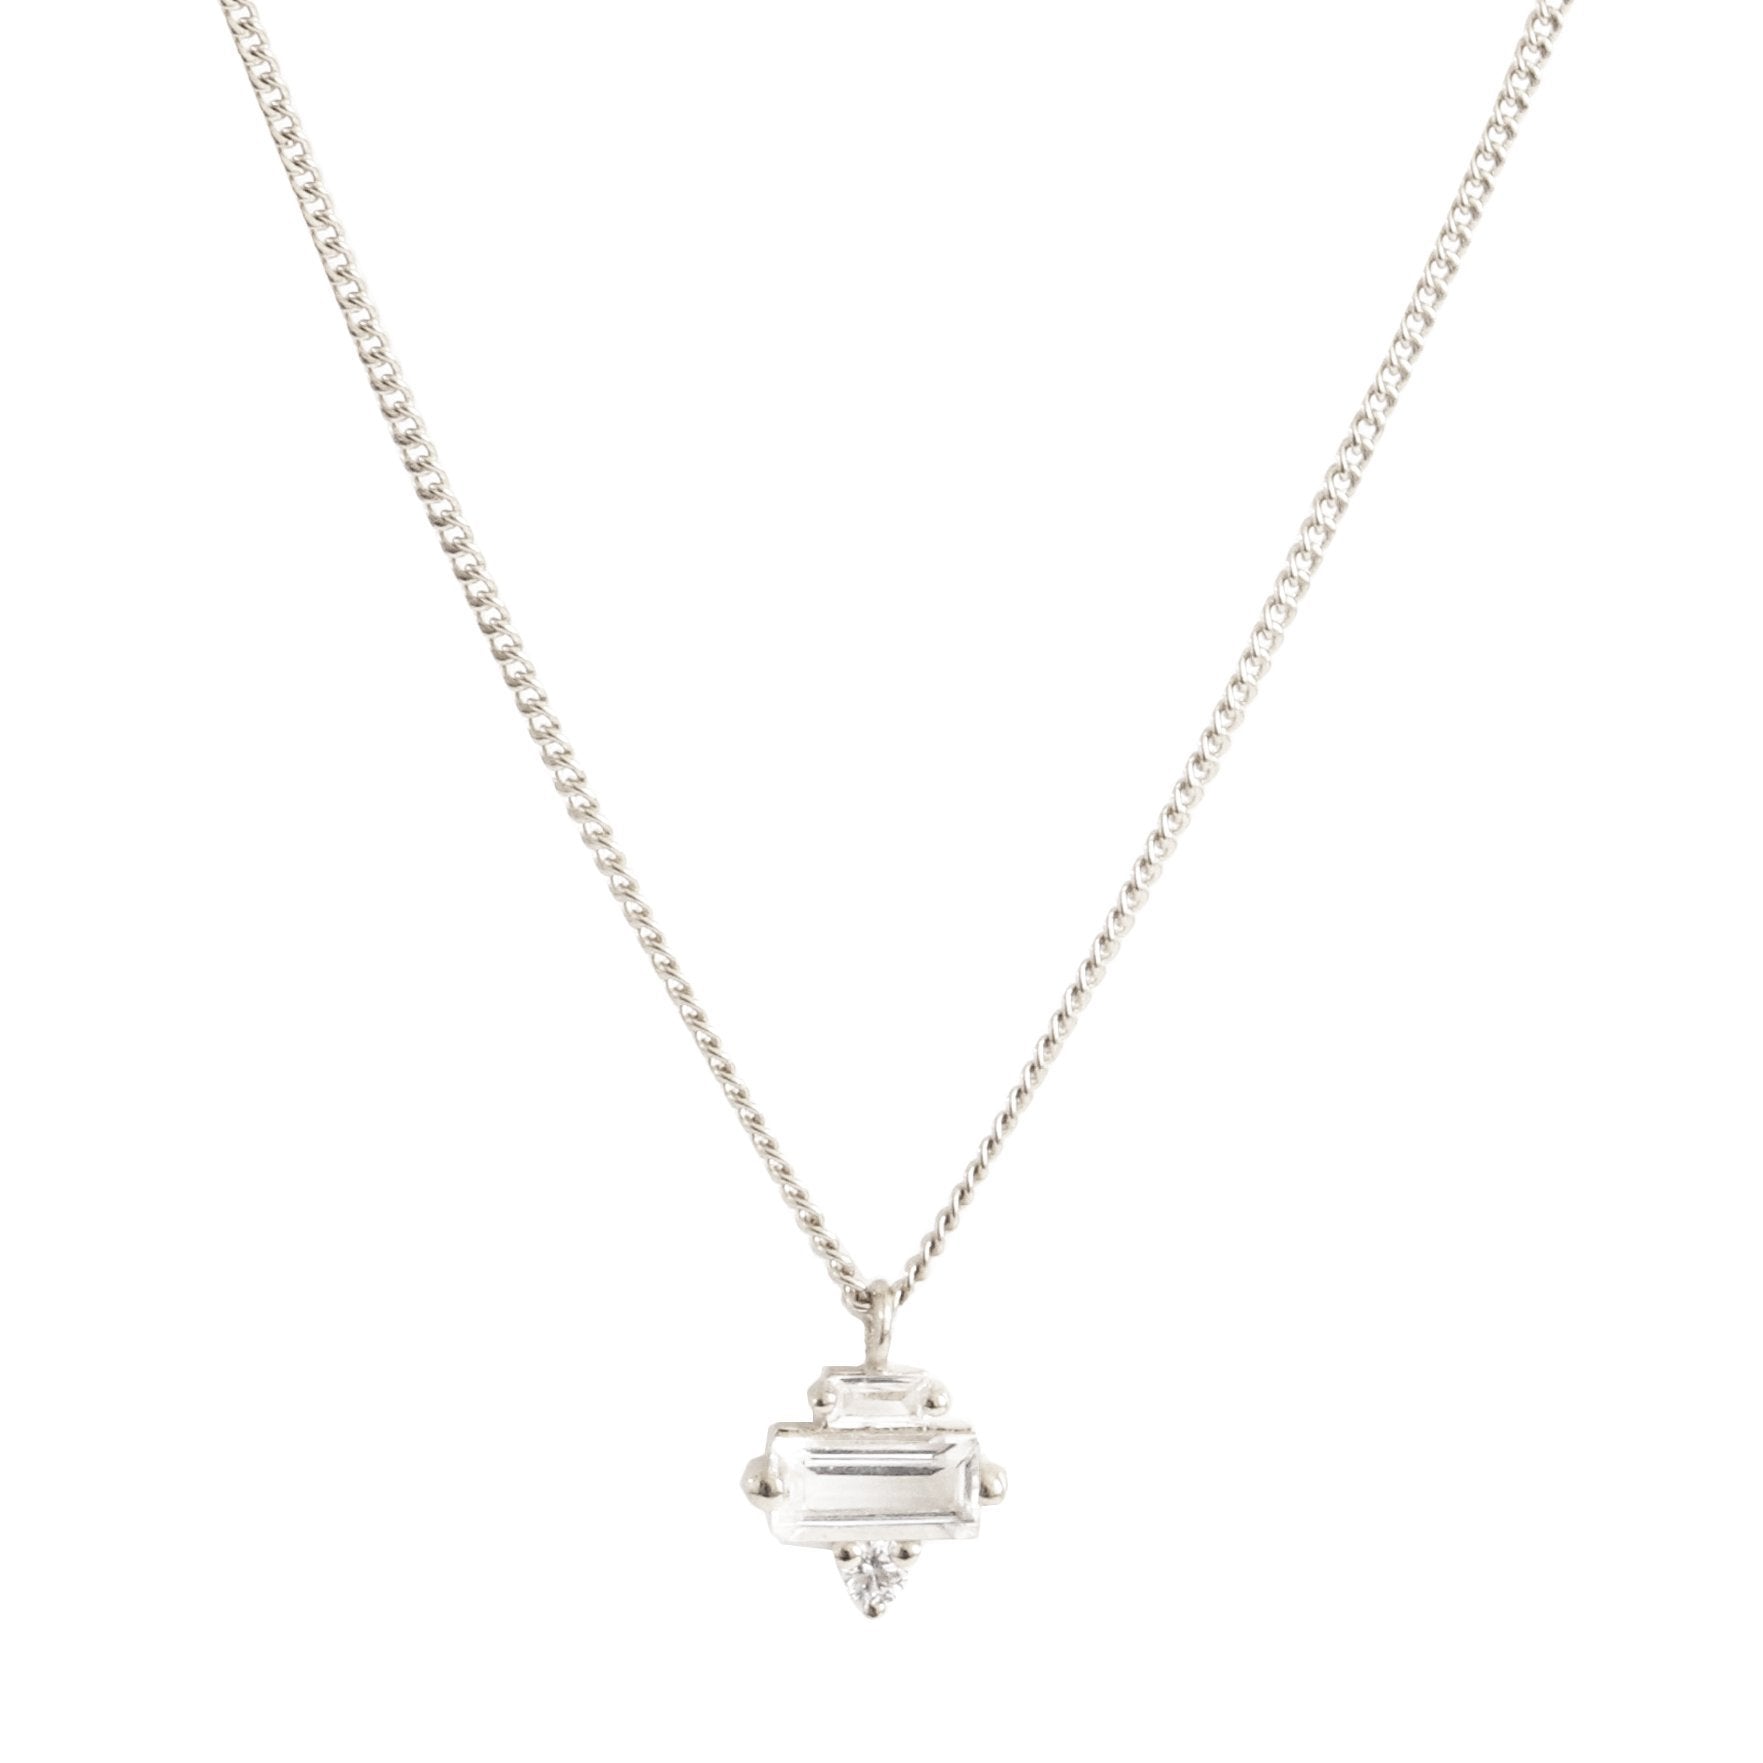 Tiny Loyal Prism Necklace - White Topaz, Cubic Zirconia & Silver - SO PRETTY CARA COTTER